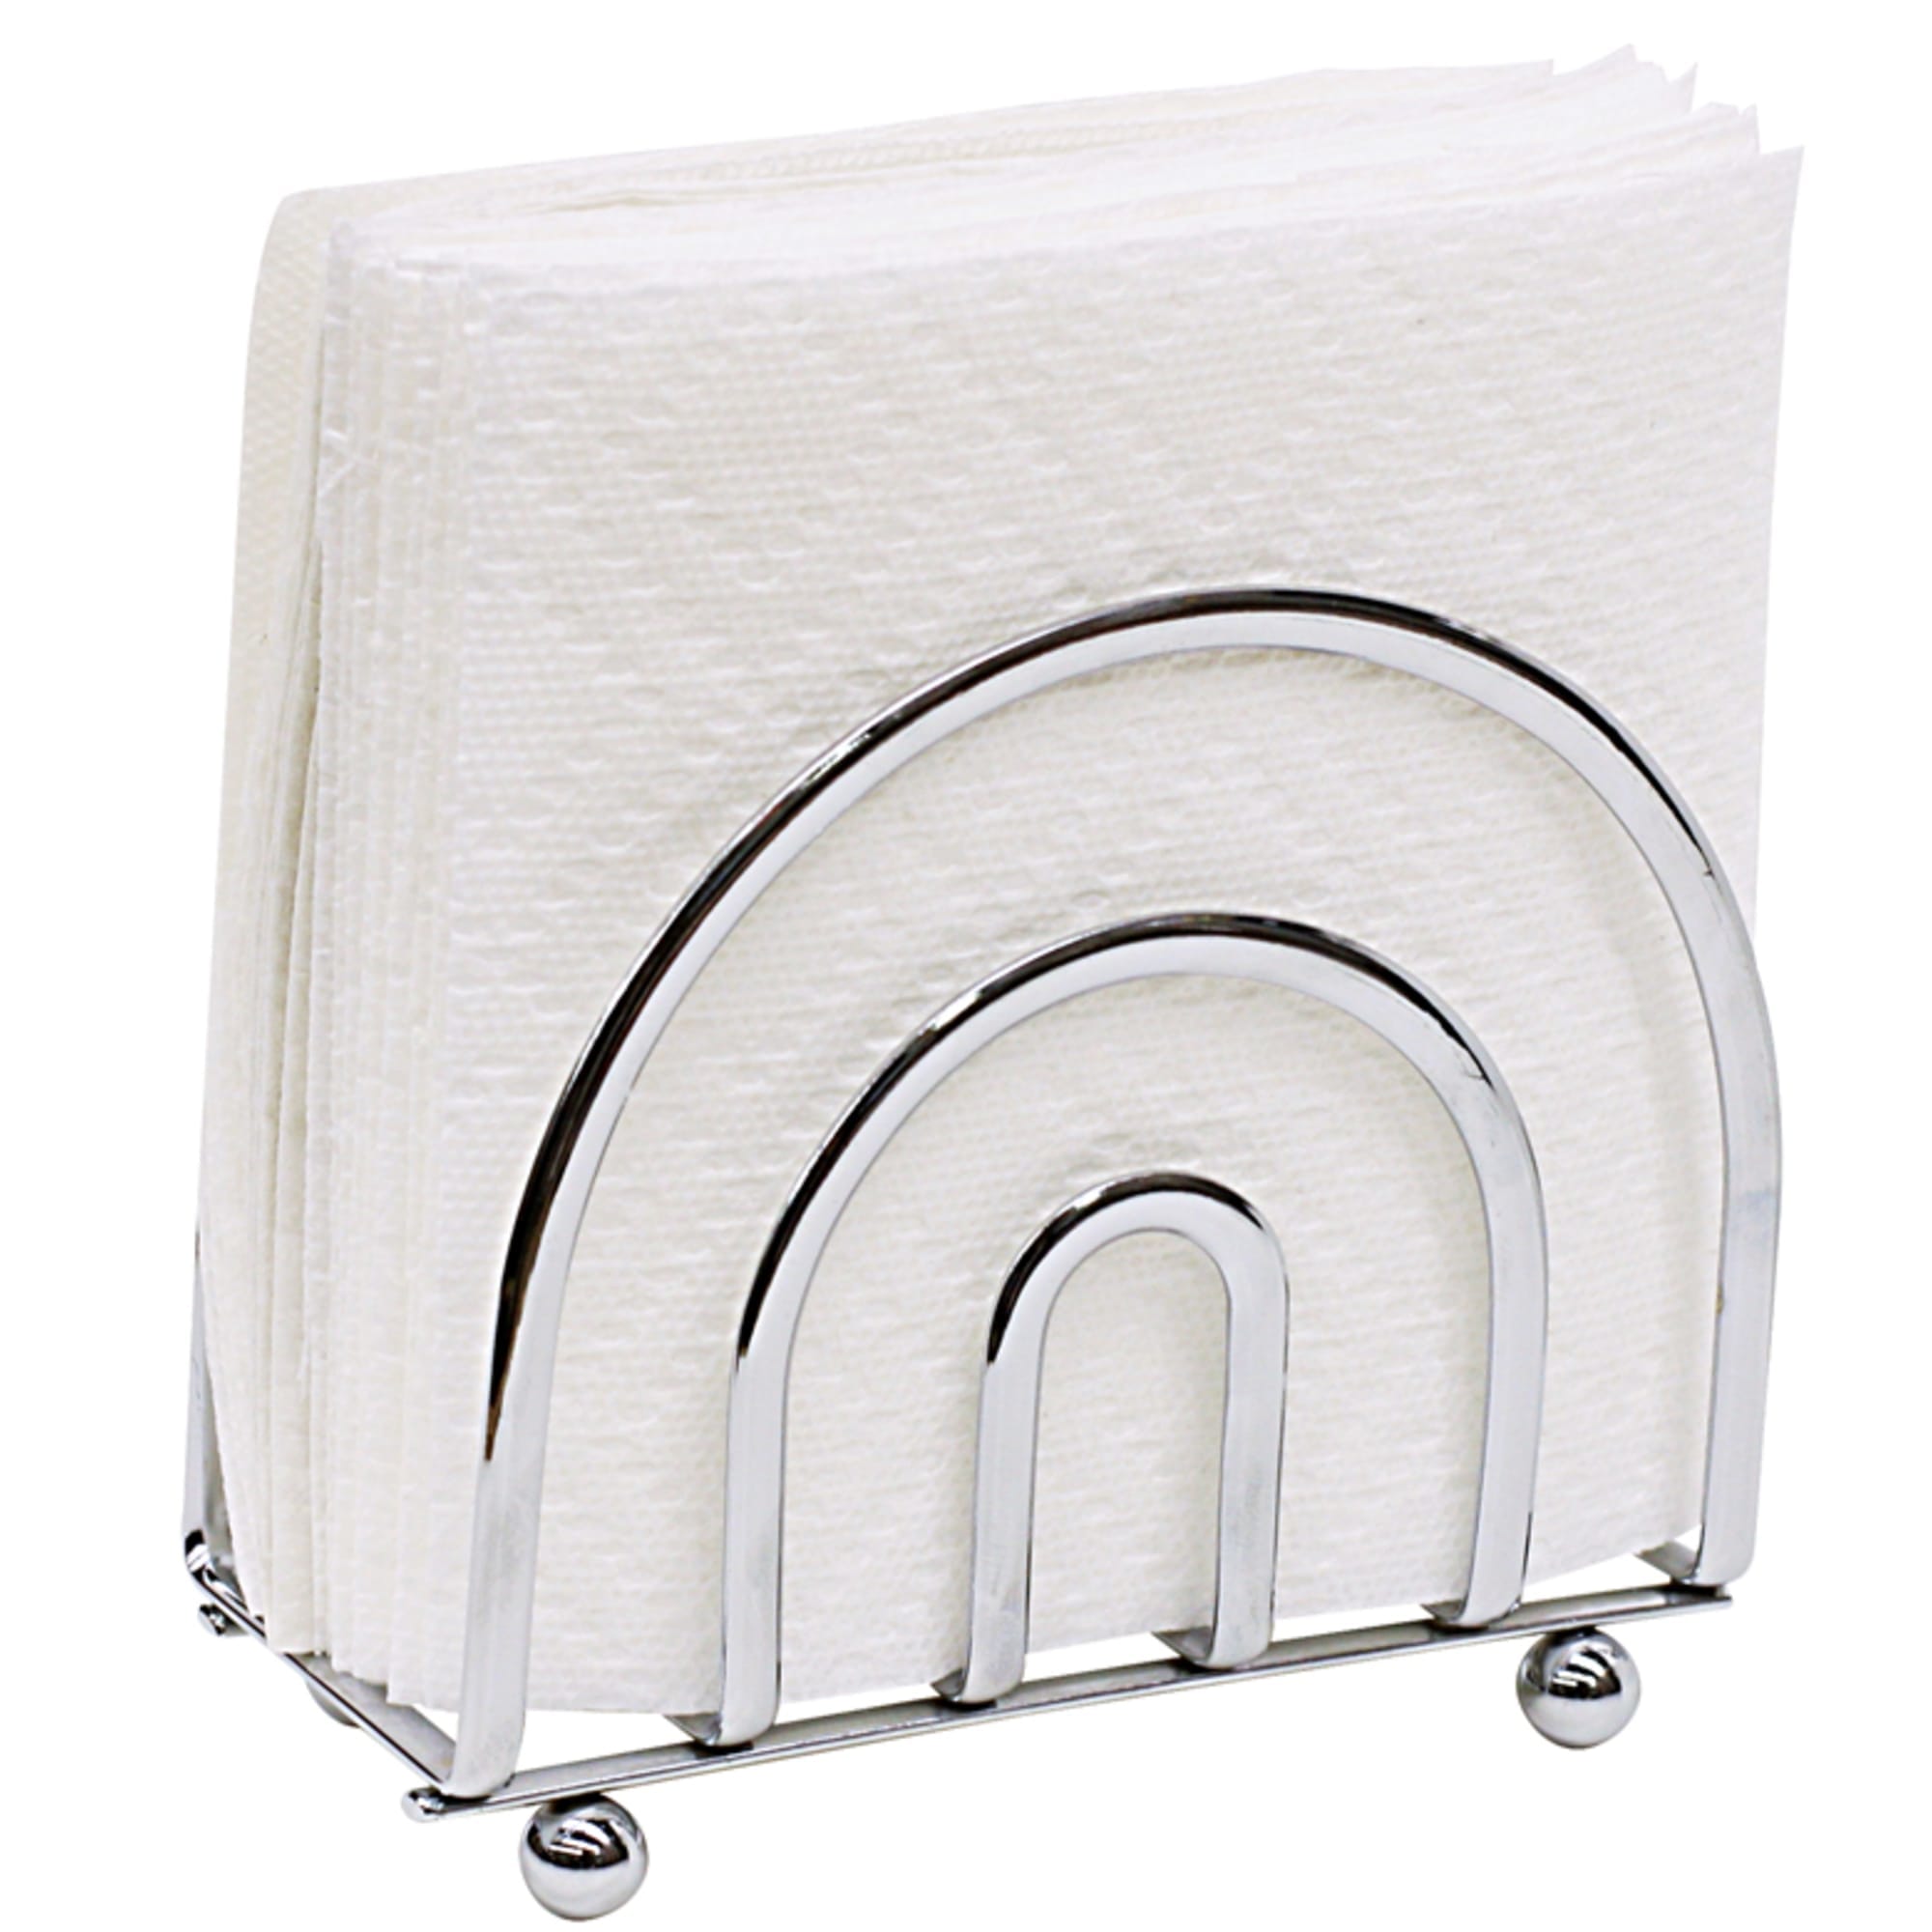 Home Basics Flat Wire Collection Napkin Holder $3.00 EACH, CASE PACK OF 12